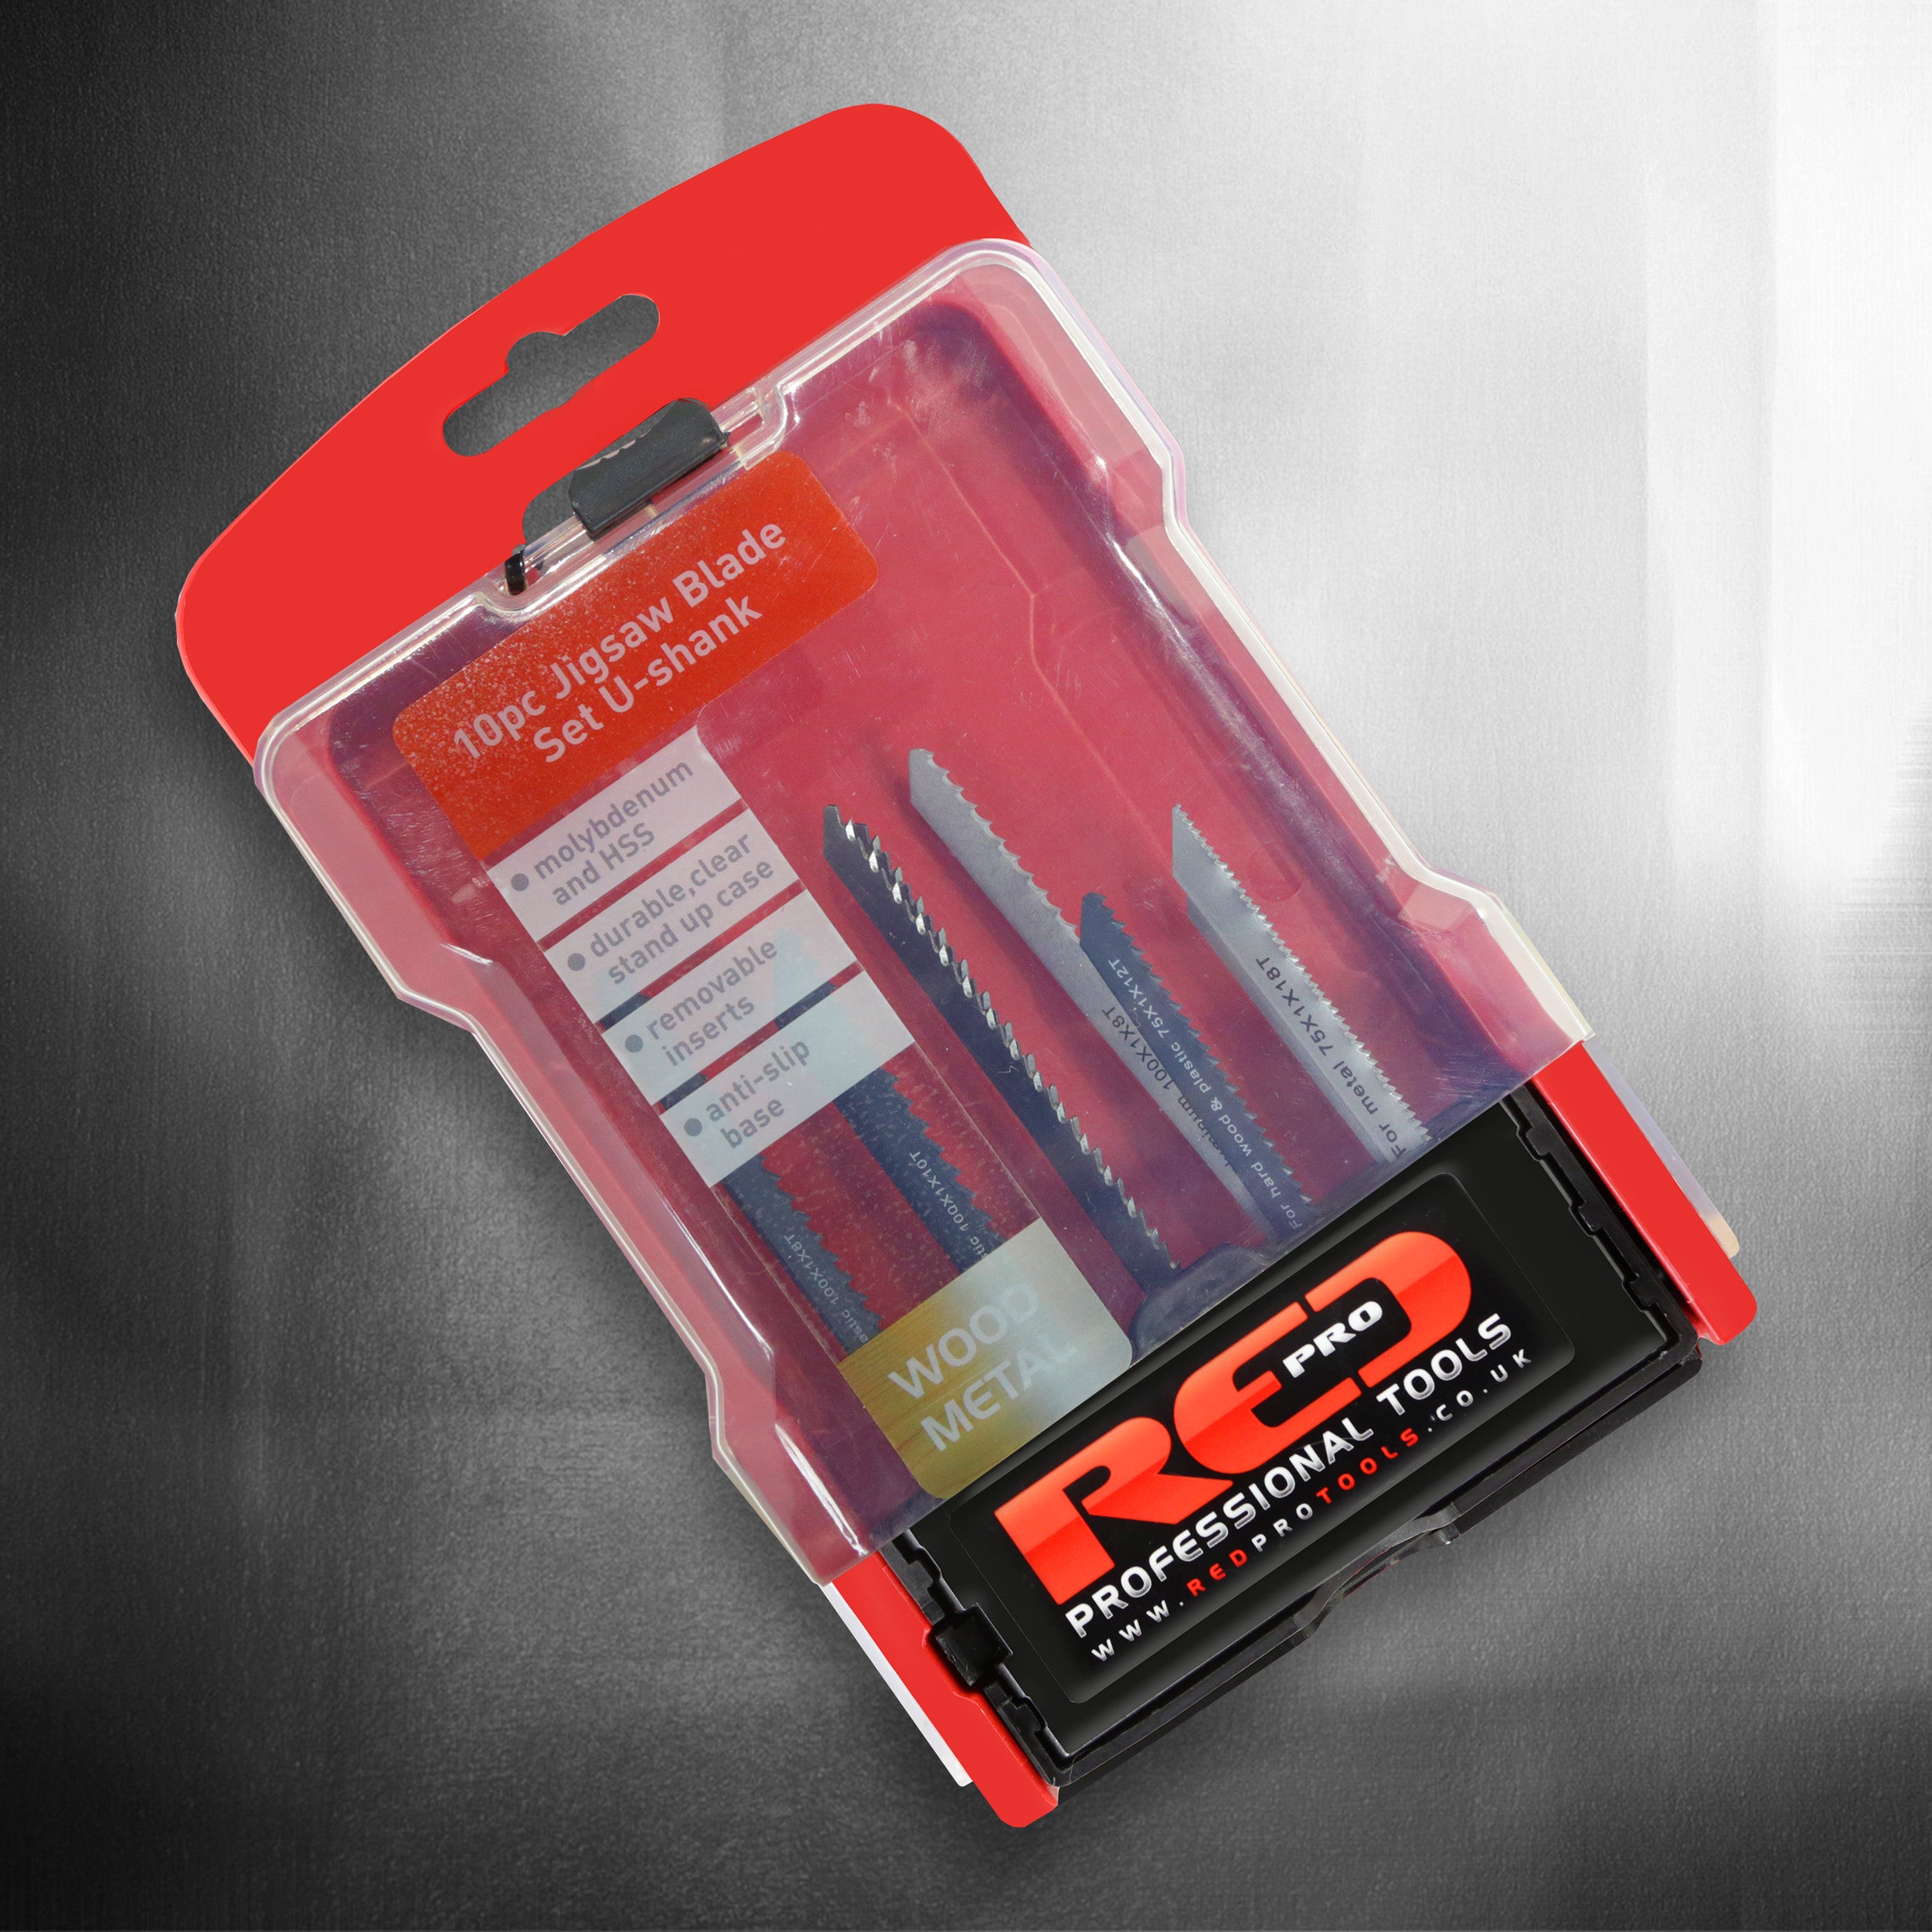 10 Piece U-Shank Jigsaw Blade Set by Red Pro Tools, sold by In-Excess